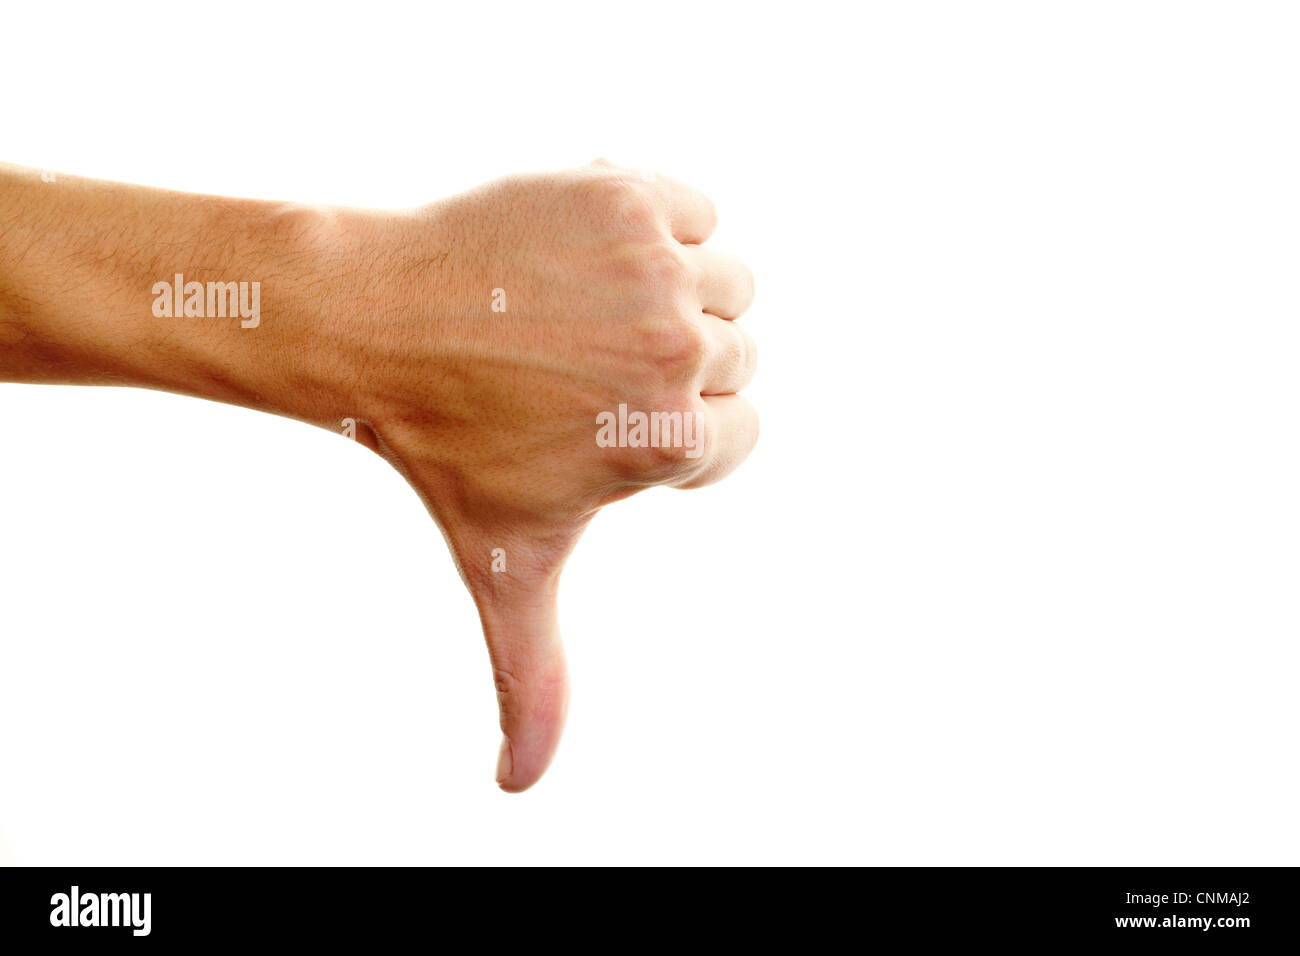 Image of human hand showing thumb down in isolation Stock Photo